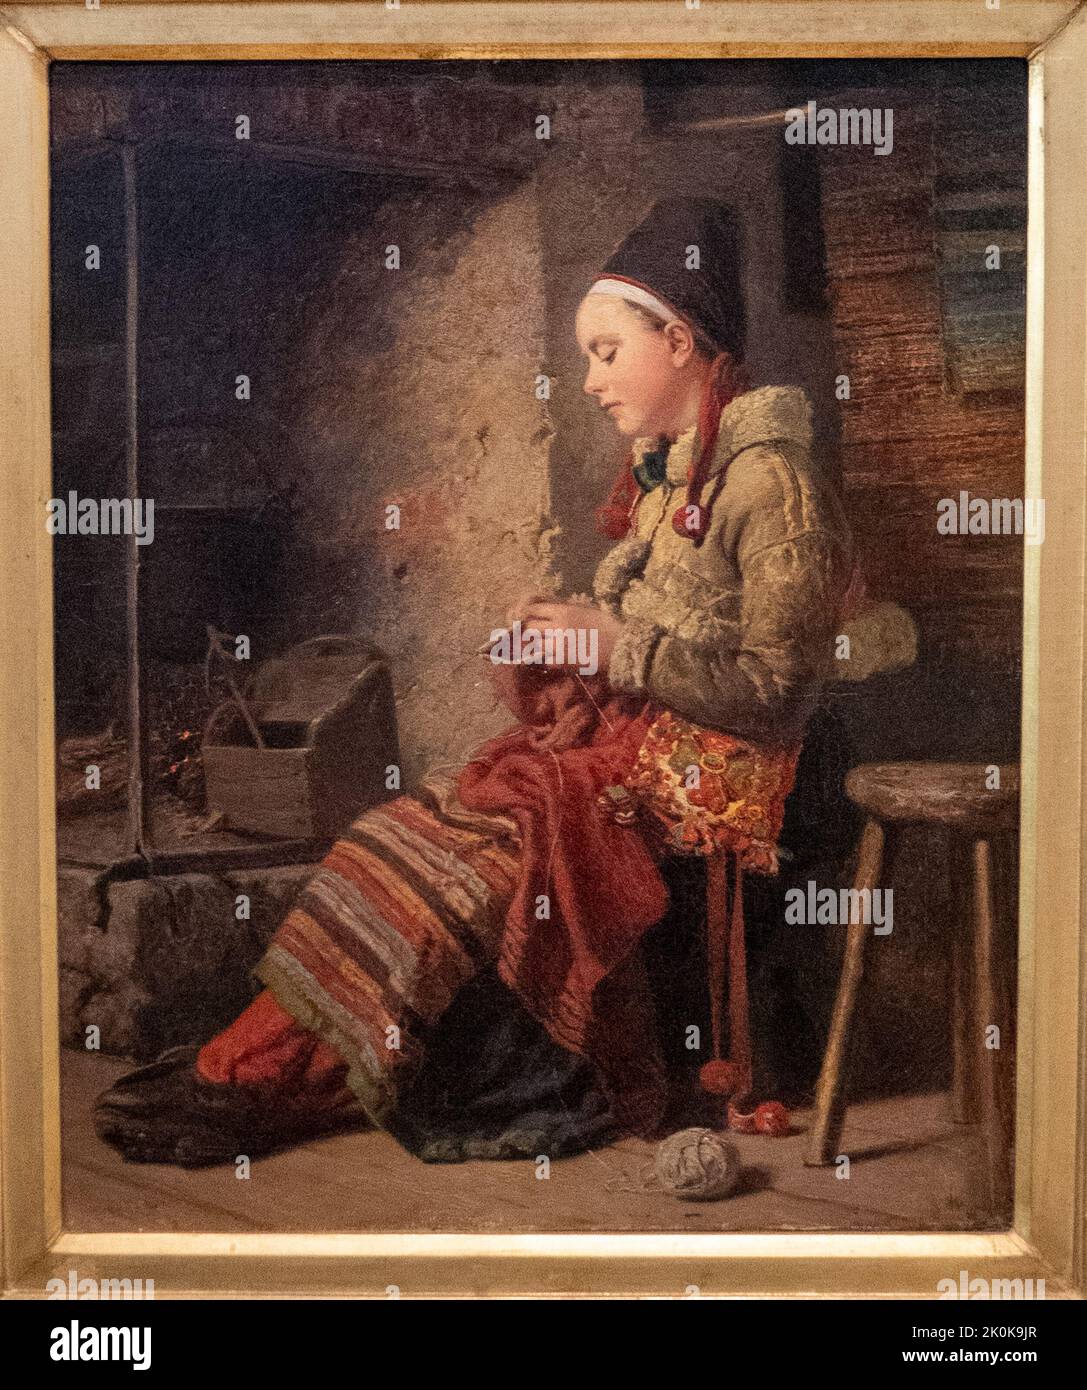 Rattvik Girl by ther Fireside by Fredrik Hockert, 1860 Stock Photo